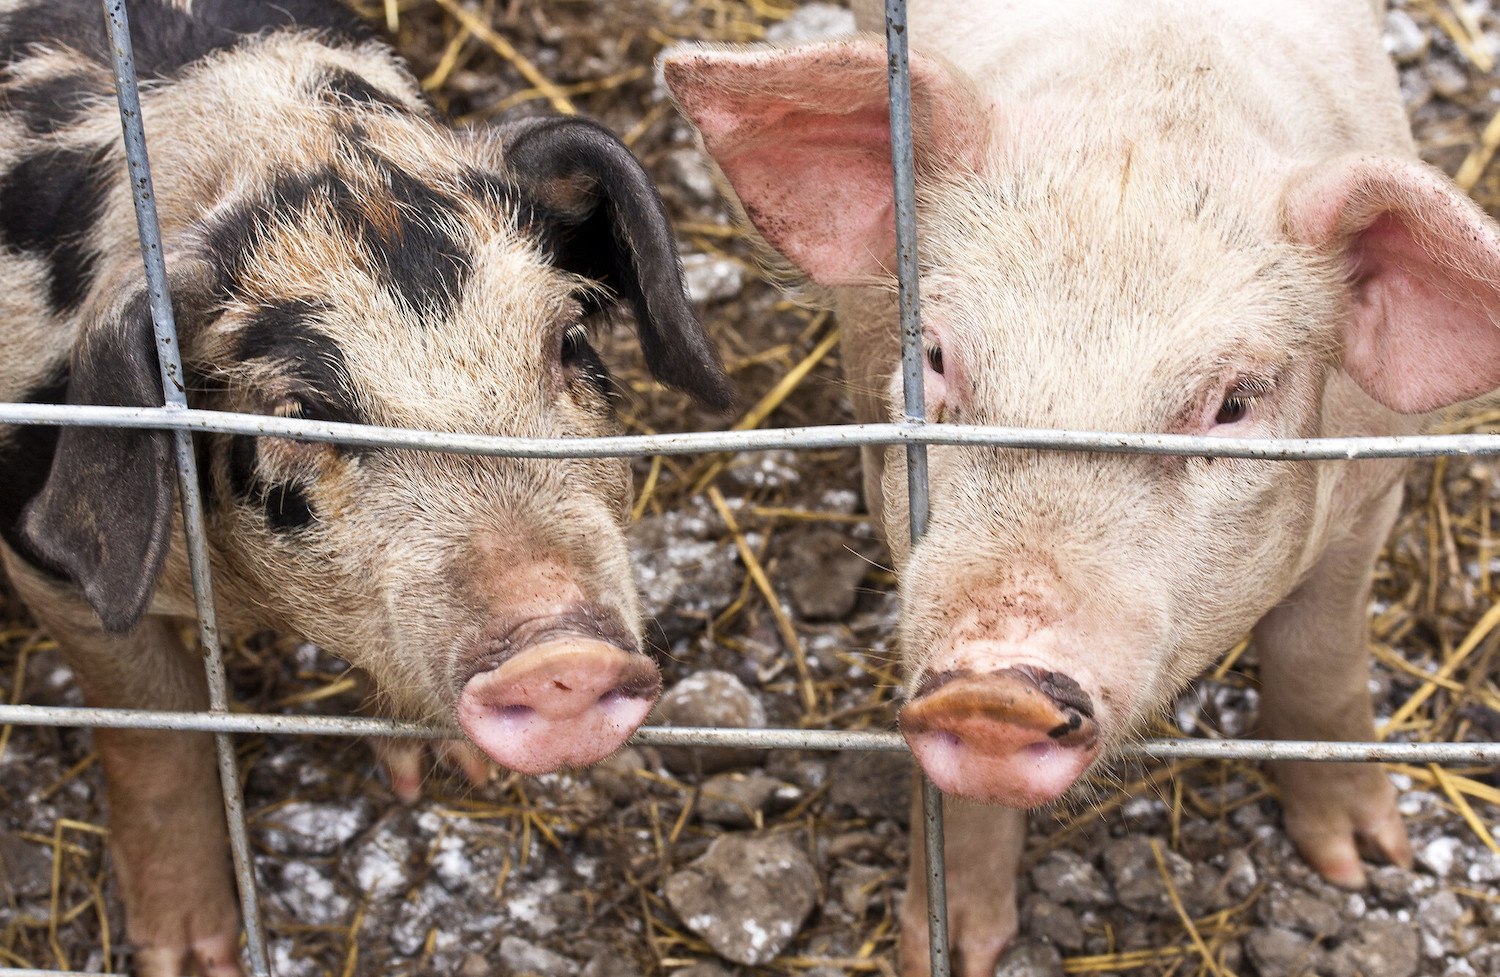 Farmers may have to cull thousands of hogs a day—and there are no good  options for disposal